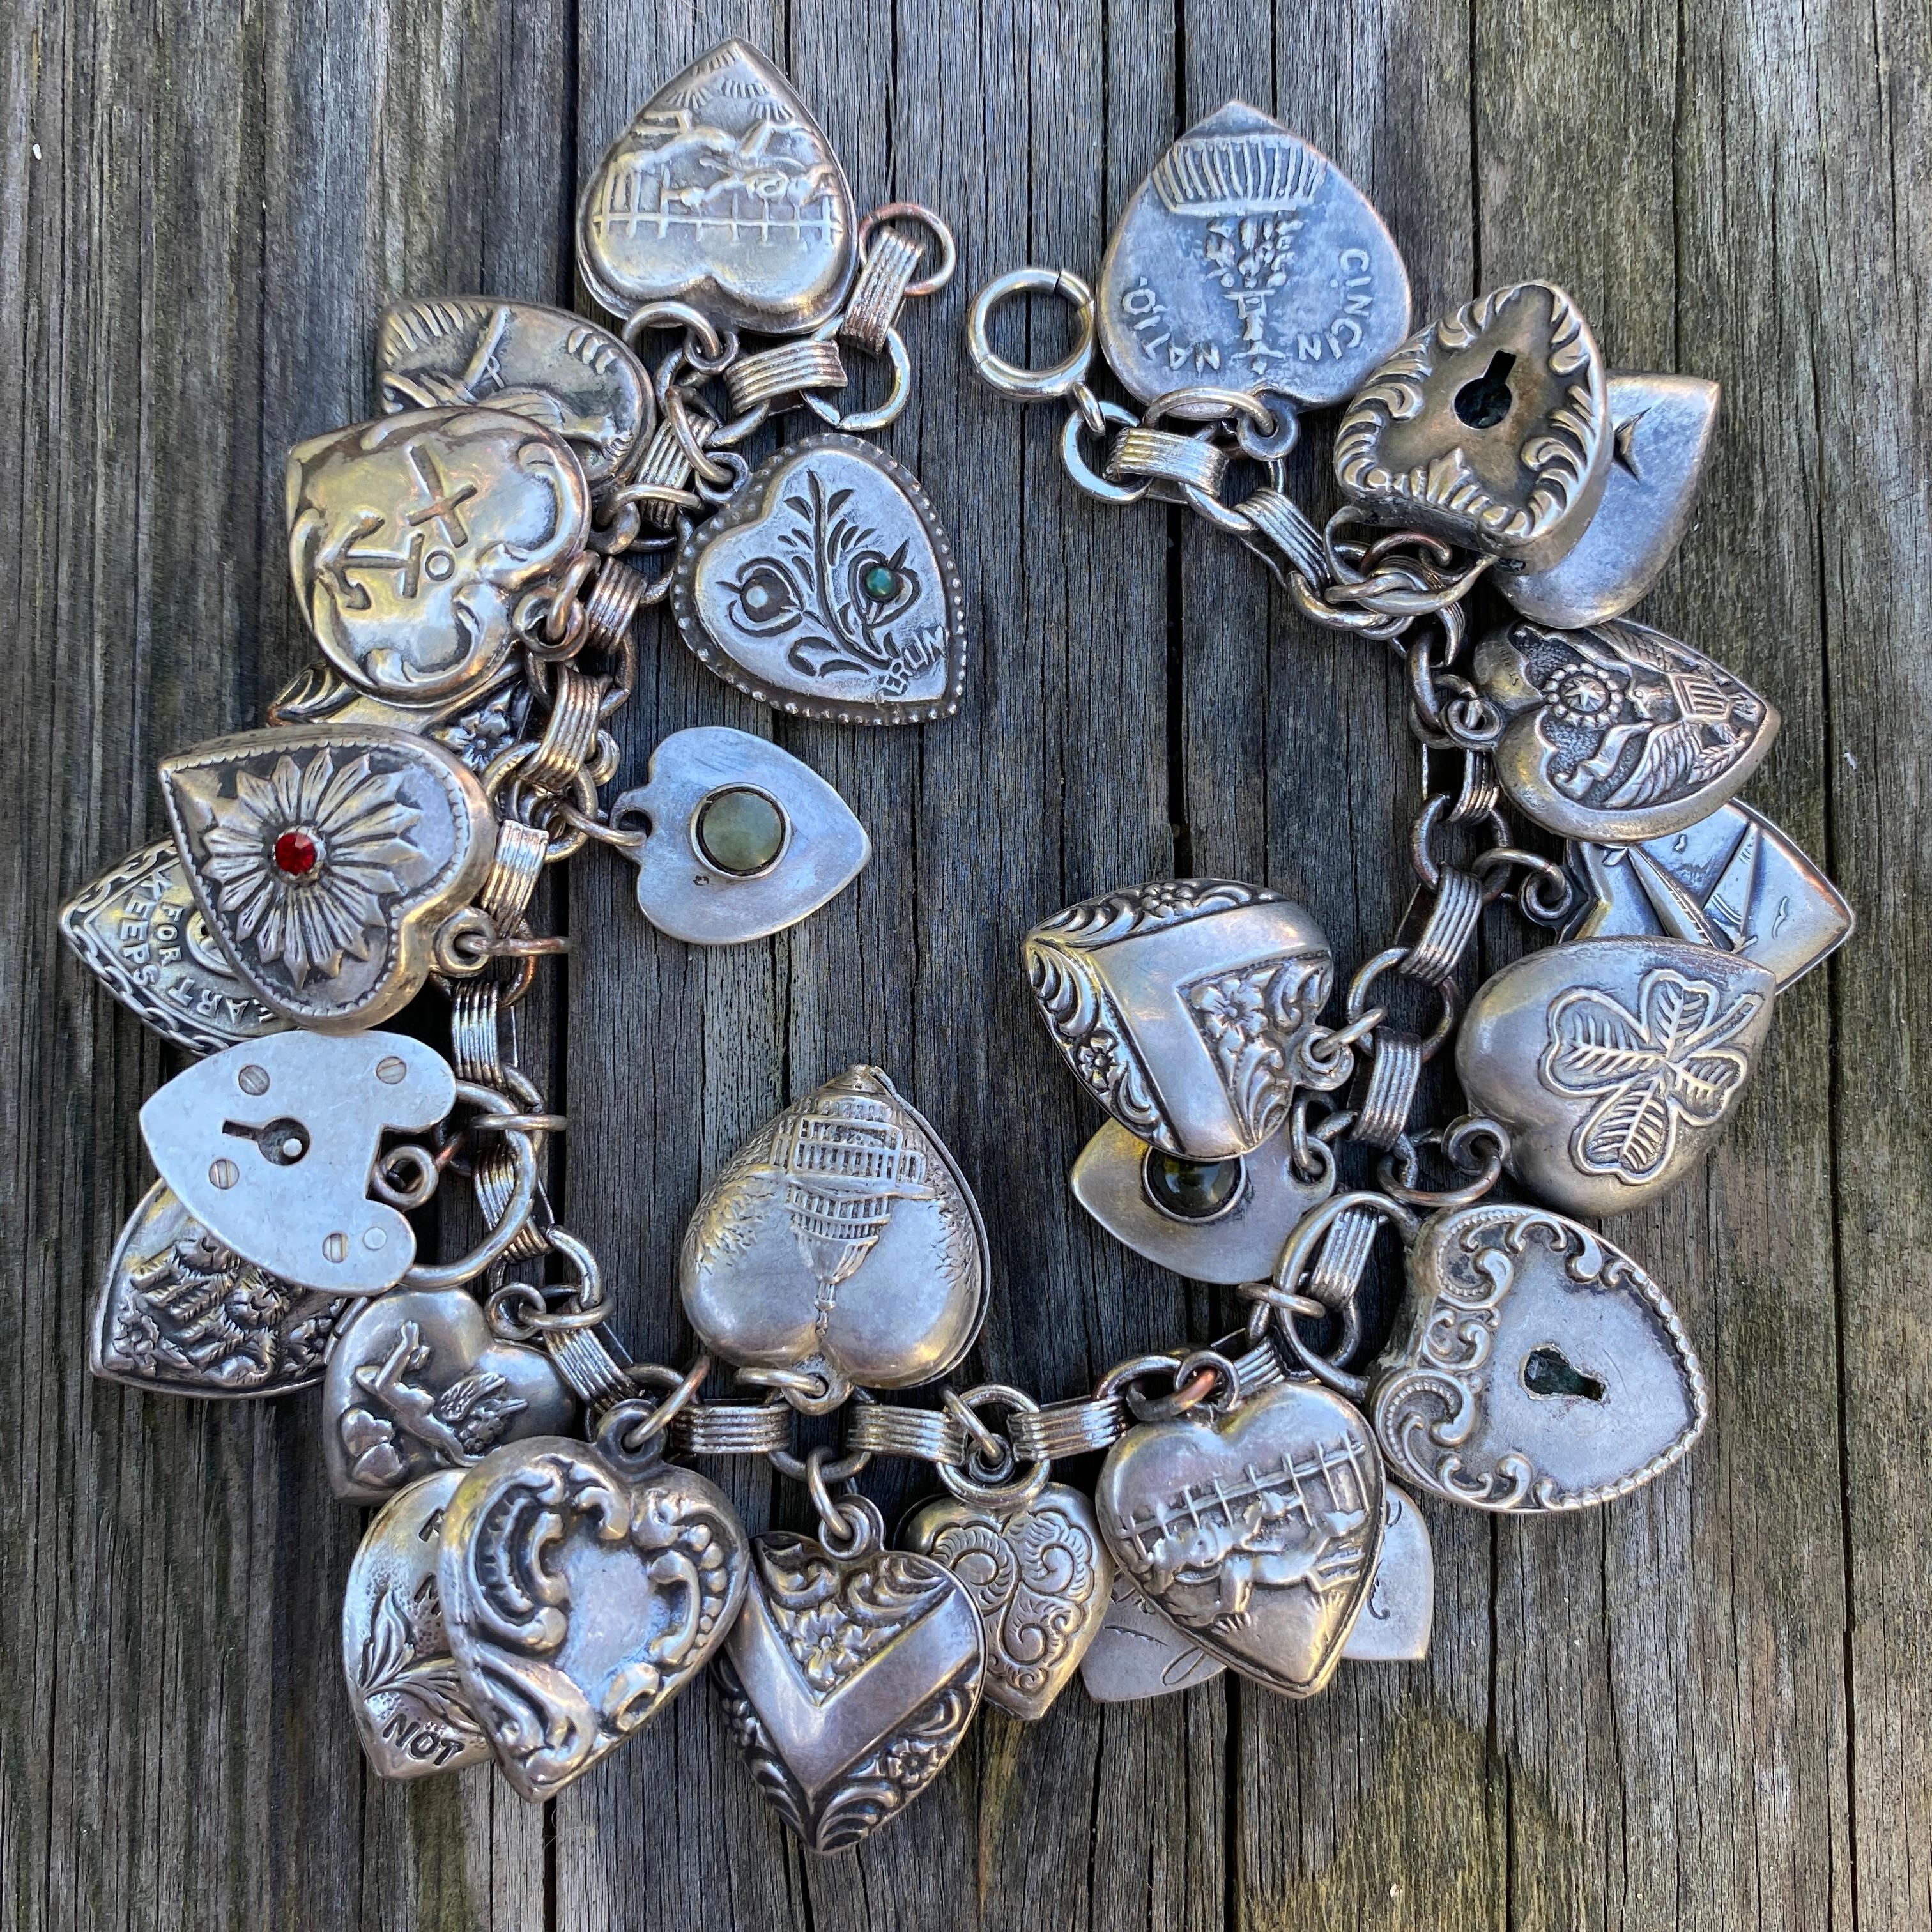 Details:
Fantastic 1900-1940's vintage charm bracelet with puffy heart charms. Great collection of 28 puffy hearts, three sweet heart locks, three dog charms, a forget me not, cupid, airplane, for sweet engraved named hearts—Earnie, Doug, Lola,